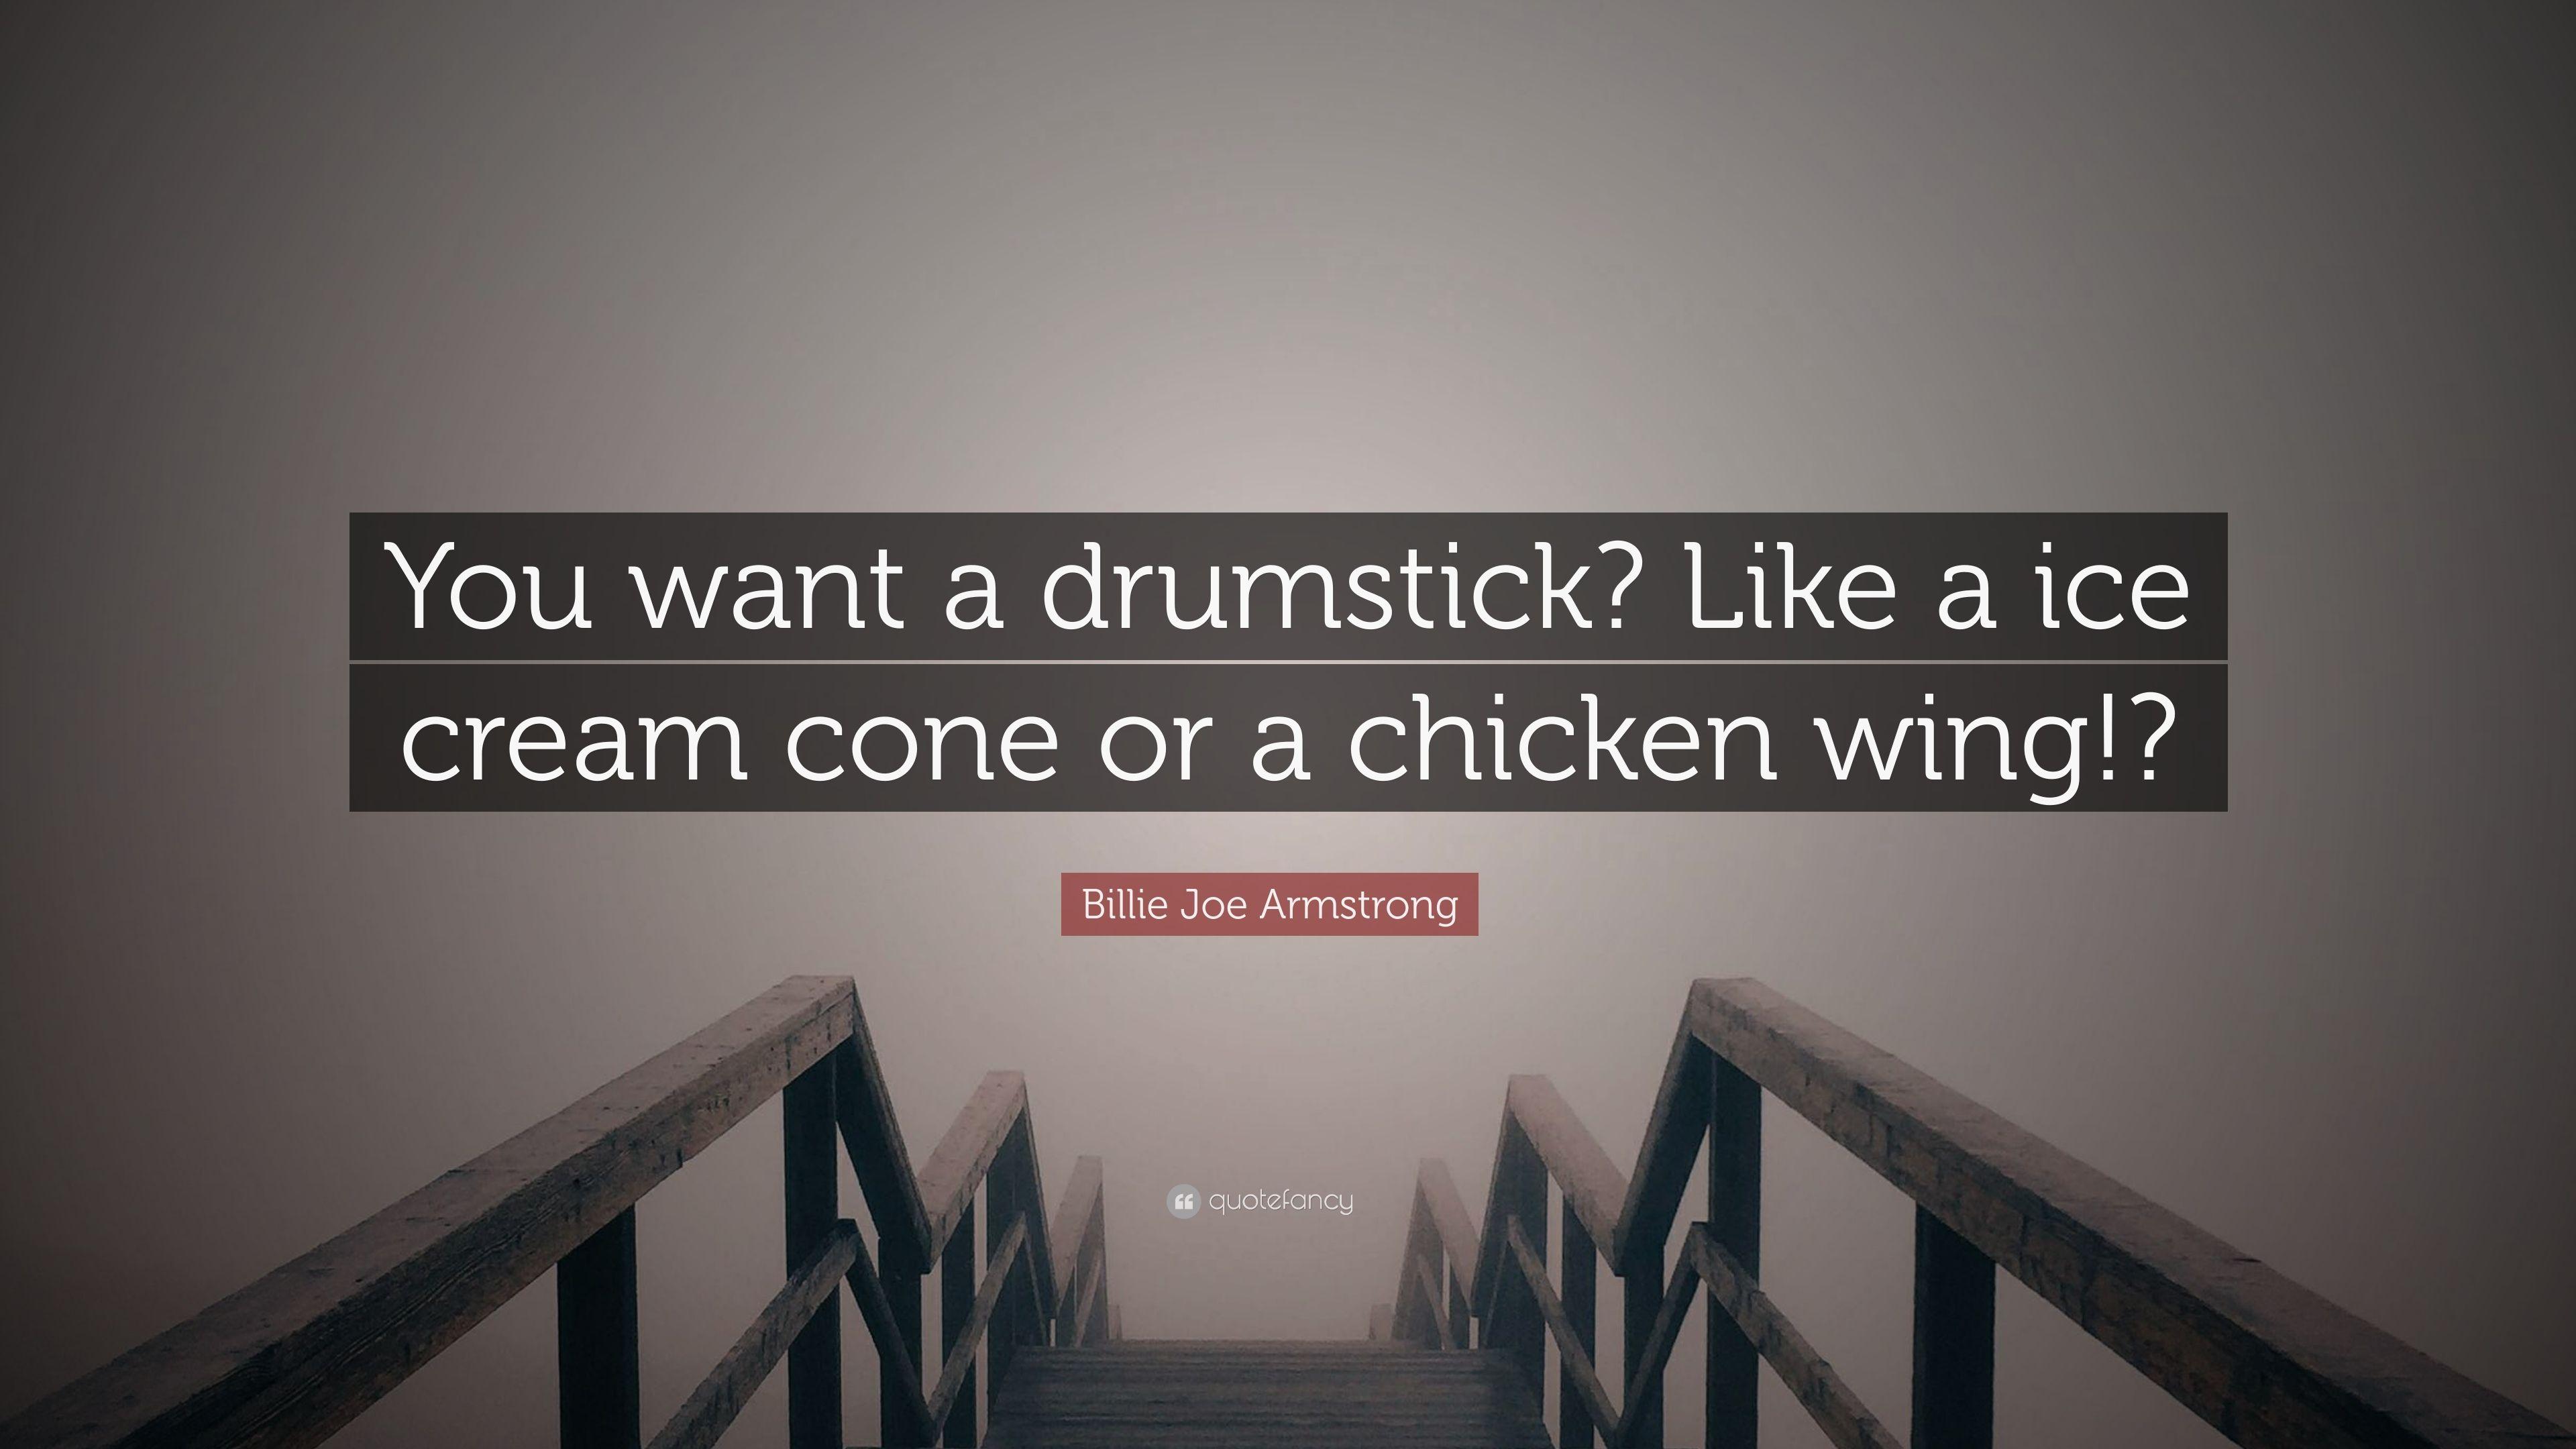 Billie Joe Armstrong Quote: “You want a drumstick? Like a ice cream